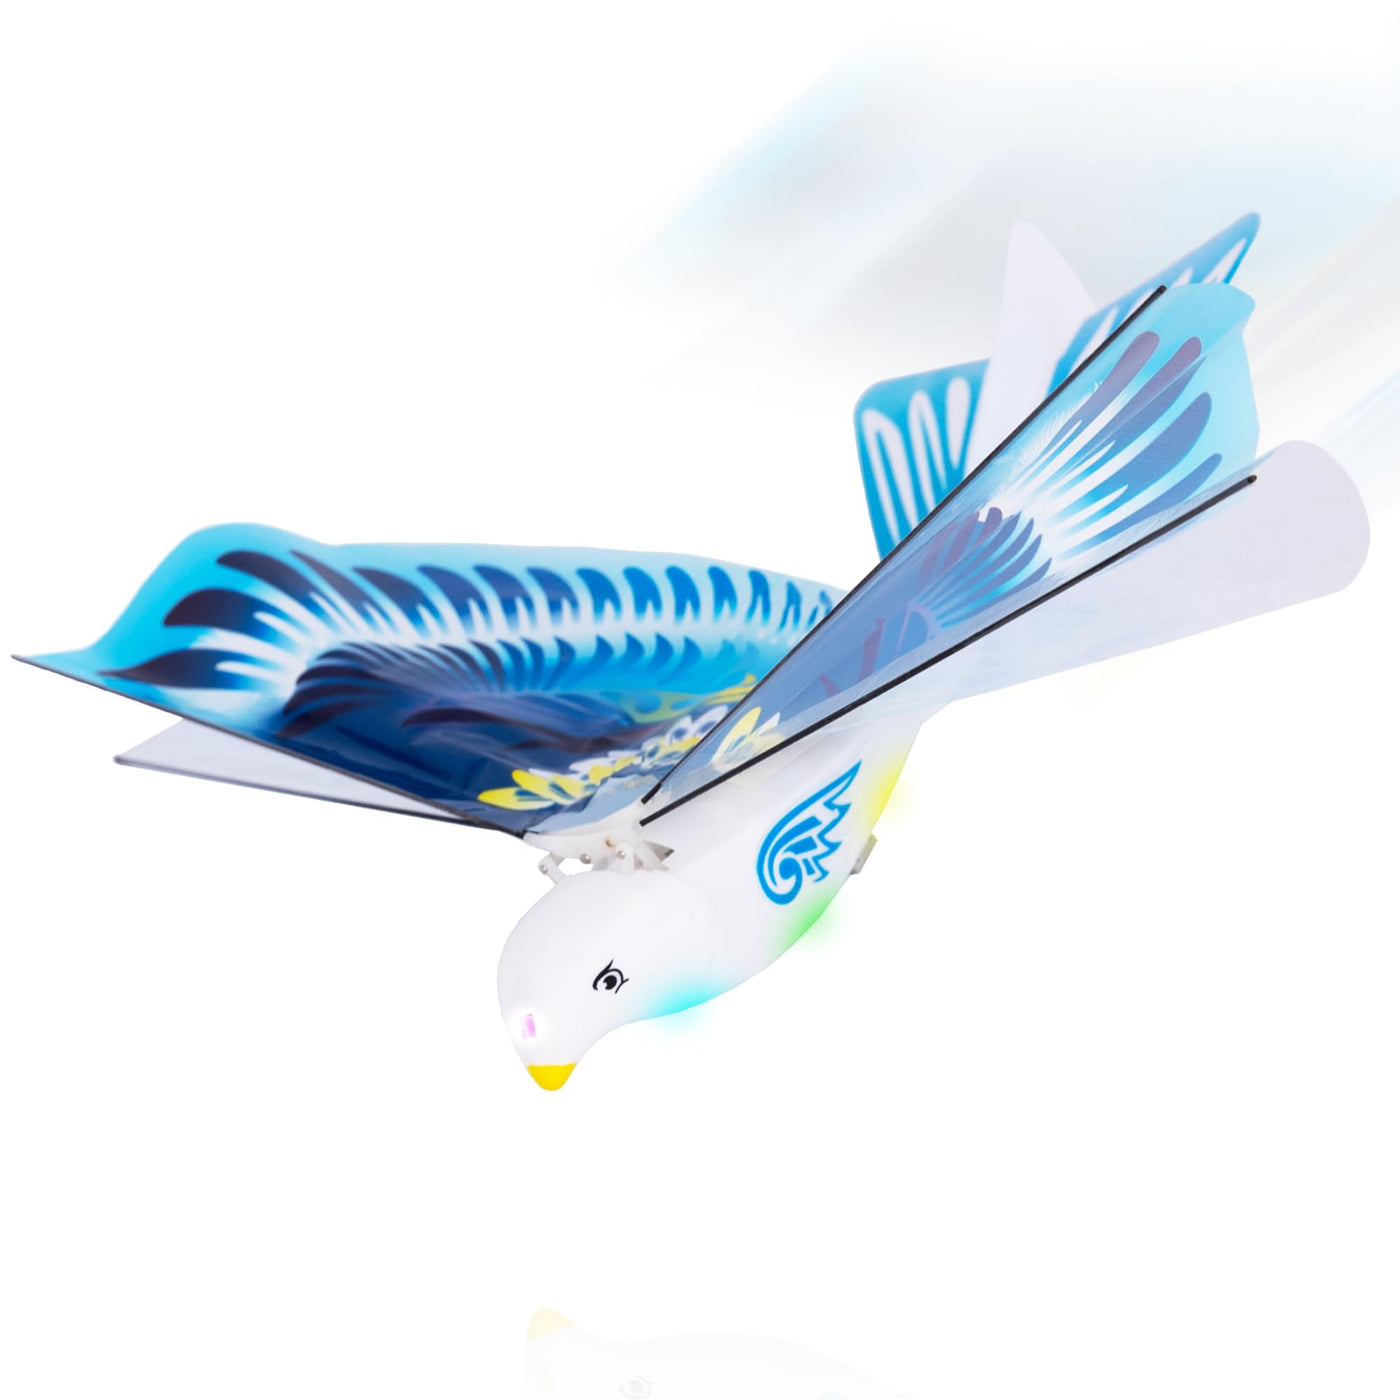 Electric Flying Bird Toy with Lights - Rechargeable Flying Toy Bird for Kids - Flaps Wings to Fly High and Fast -  Ages 3 4 5